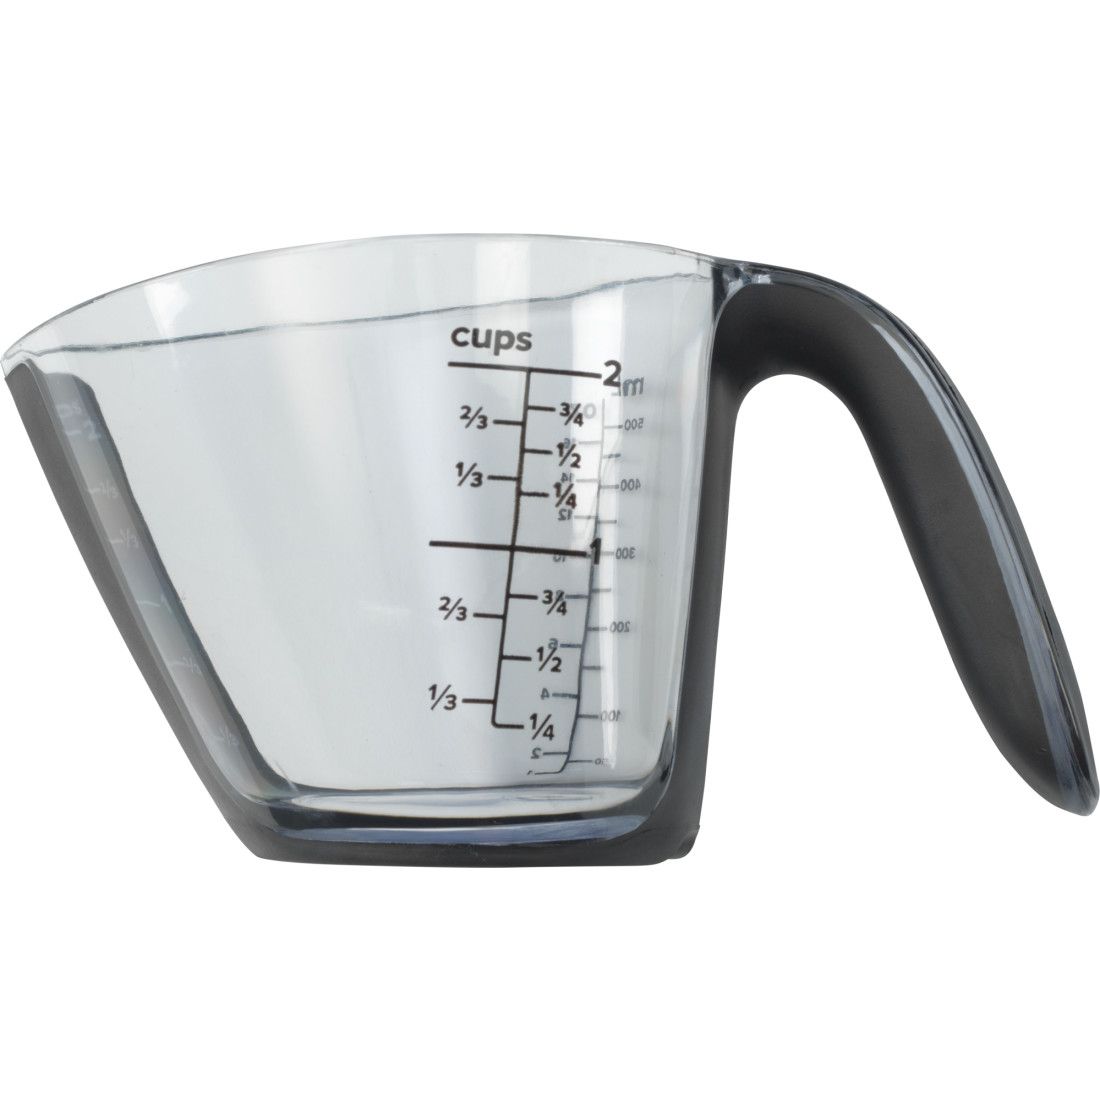 Goodcook 2 Cup Clear Plastic Measuring Cup - Foley Hardware